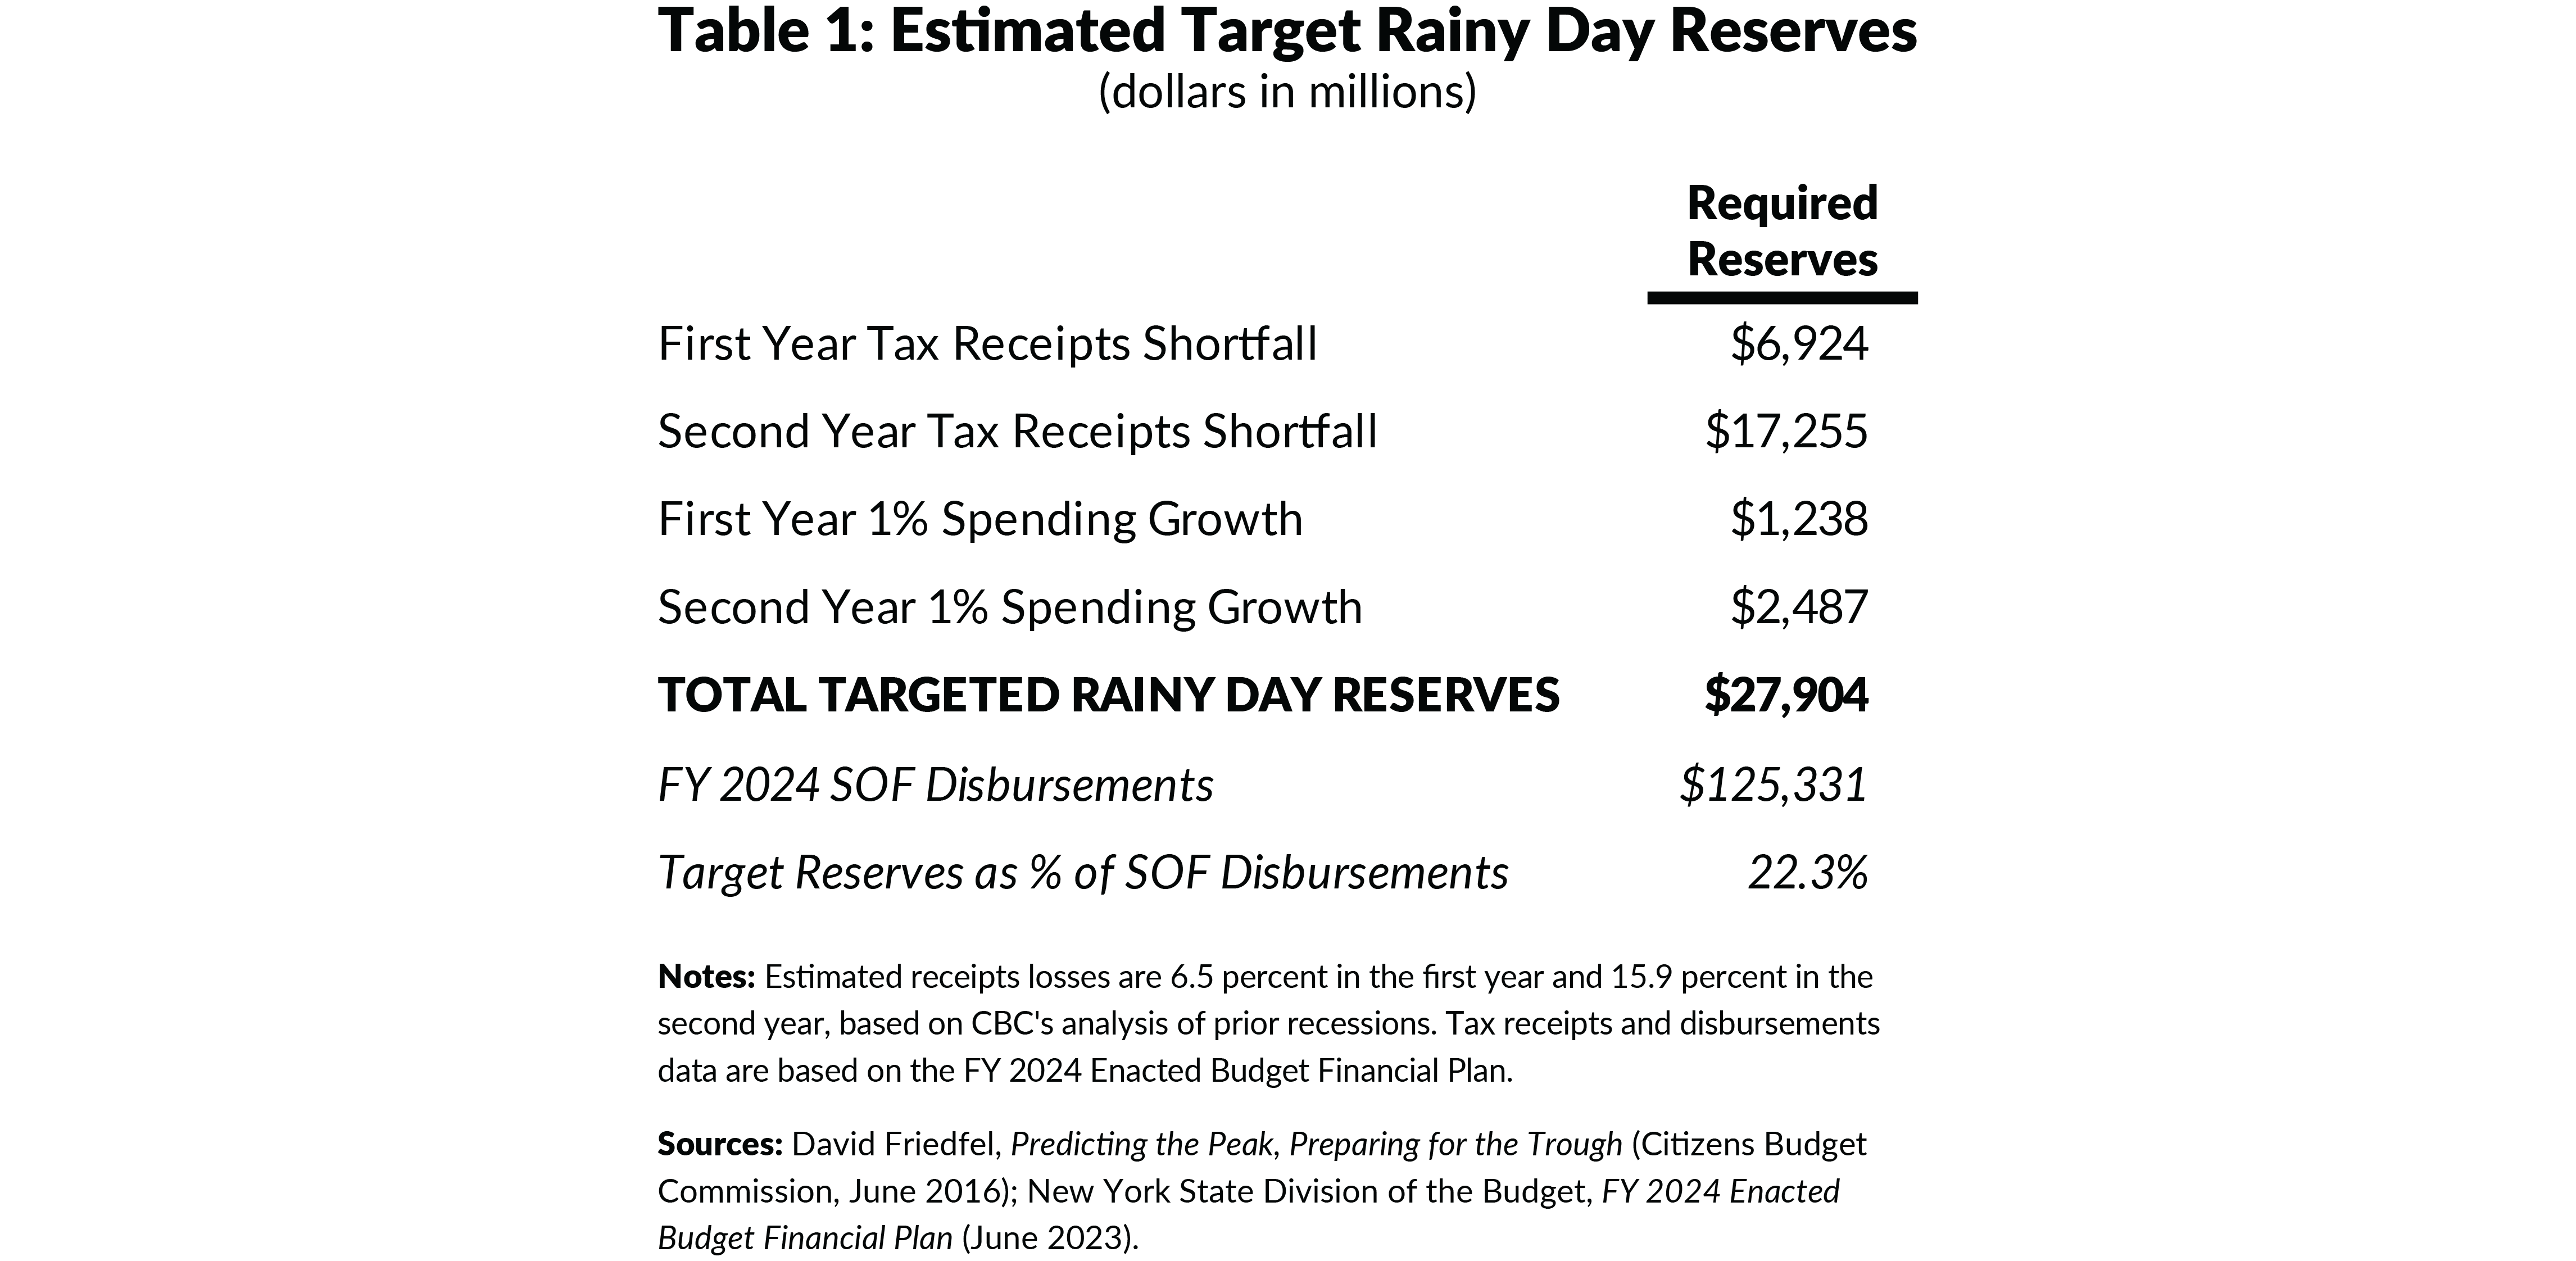 Table 1: Estimated Target Rainy Day Reserves